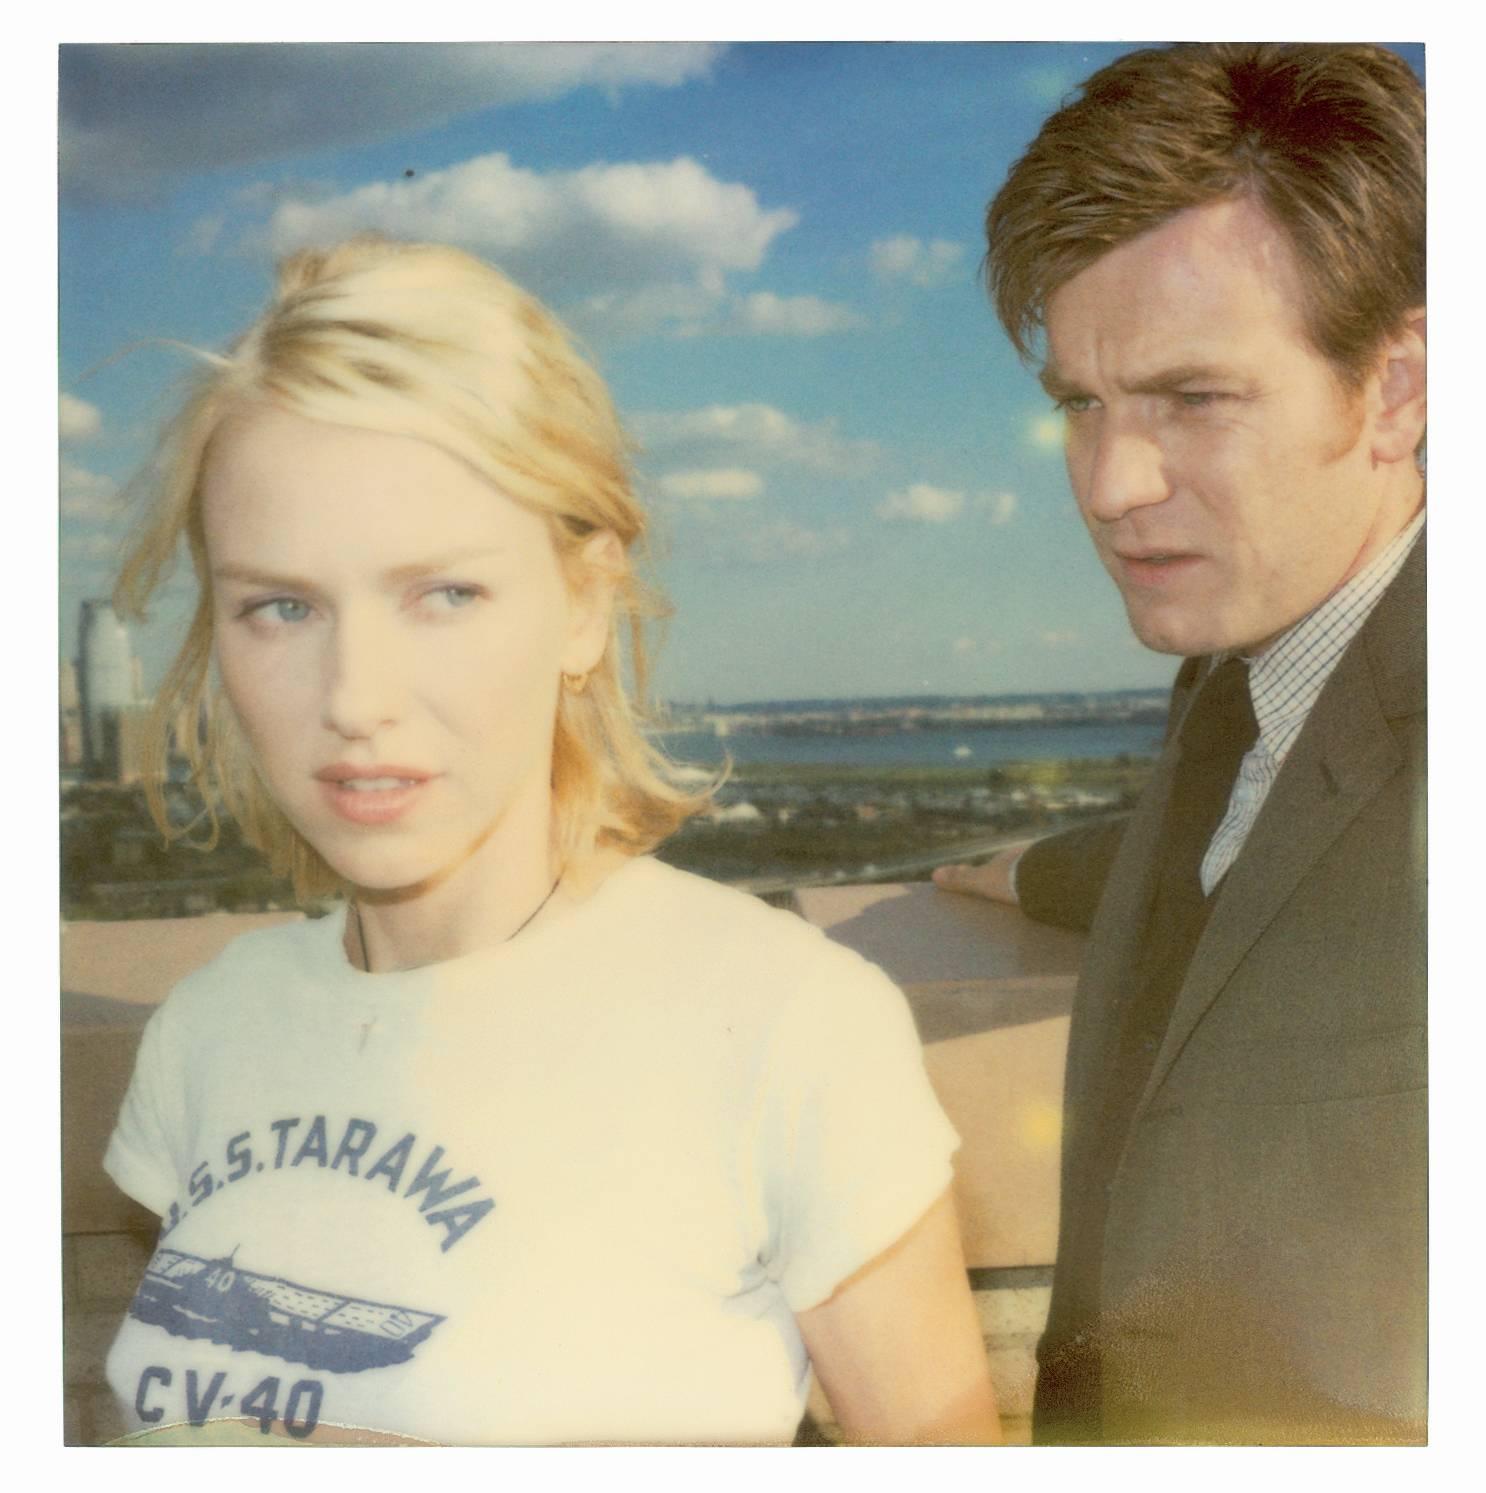 Lila and Sam from the movie Stay with Ewan McGregor, Naomi Watts, not mounted - Contemporary Photograph by Stefanie Schneider